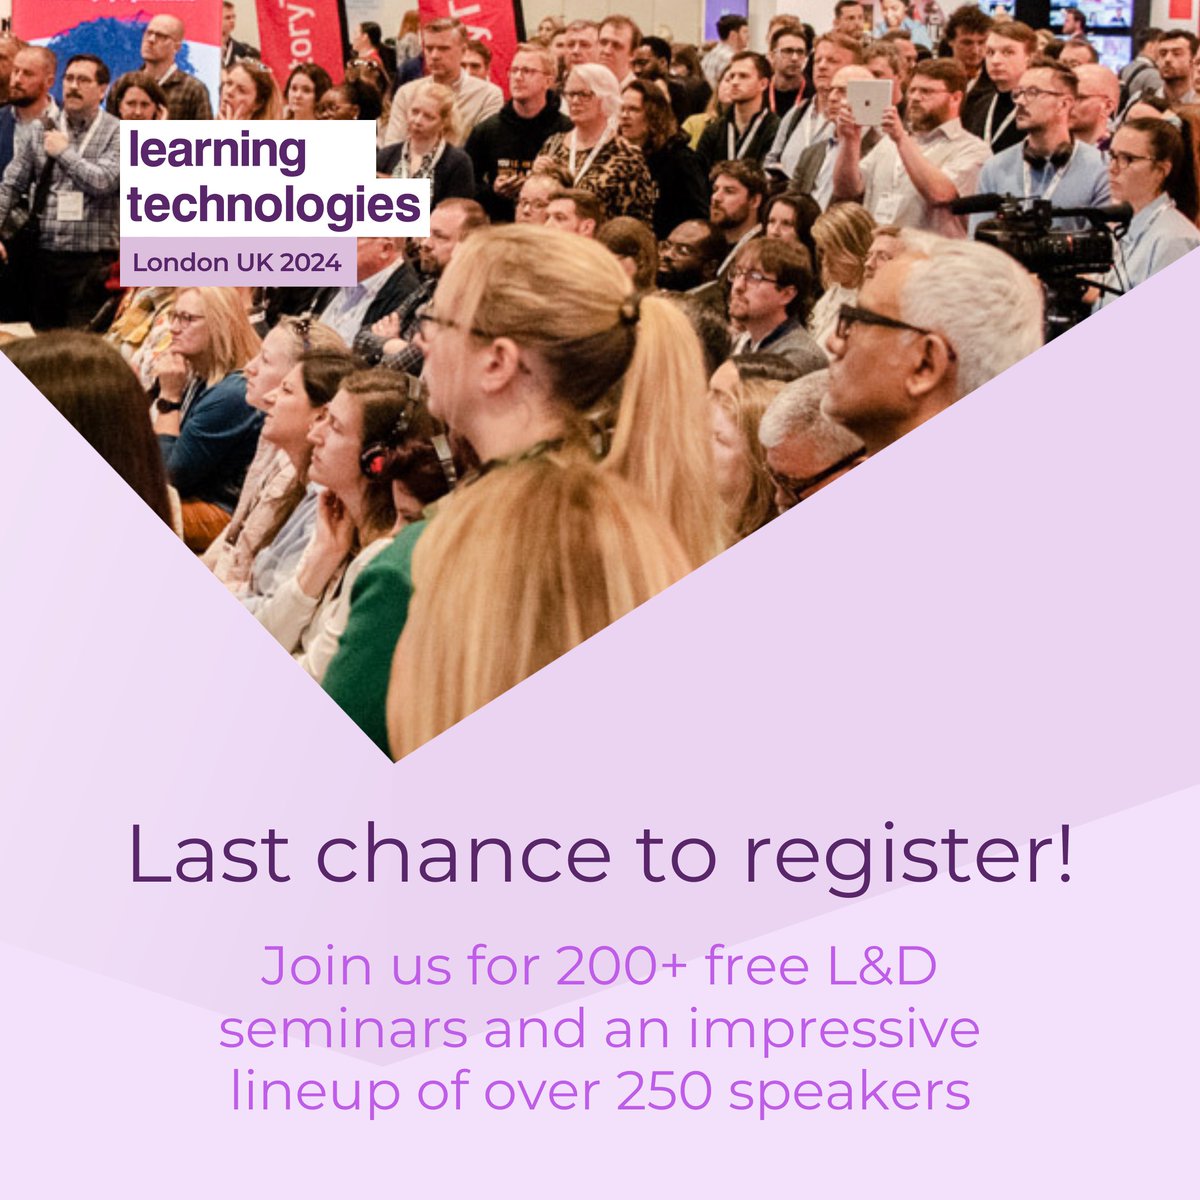 🎊 Europe's leading workplace learning event returns tomorrow #LT24UK We're so excited to open the doors and invite you to celebrate 25 years of Learning Technologies! 🎂 If you haven't already, grab your free Visitor Pass and join us 👉 ow.ly/K6wv50RgSfw #LnD #LT #AI